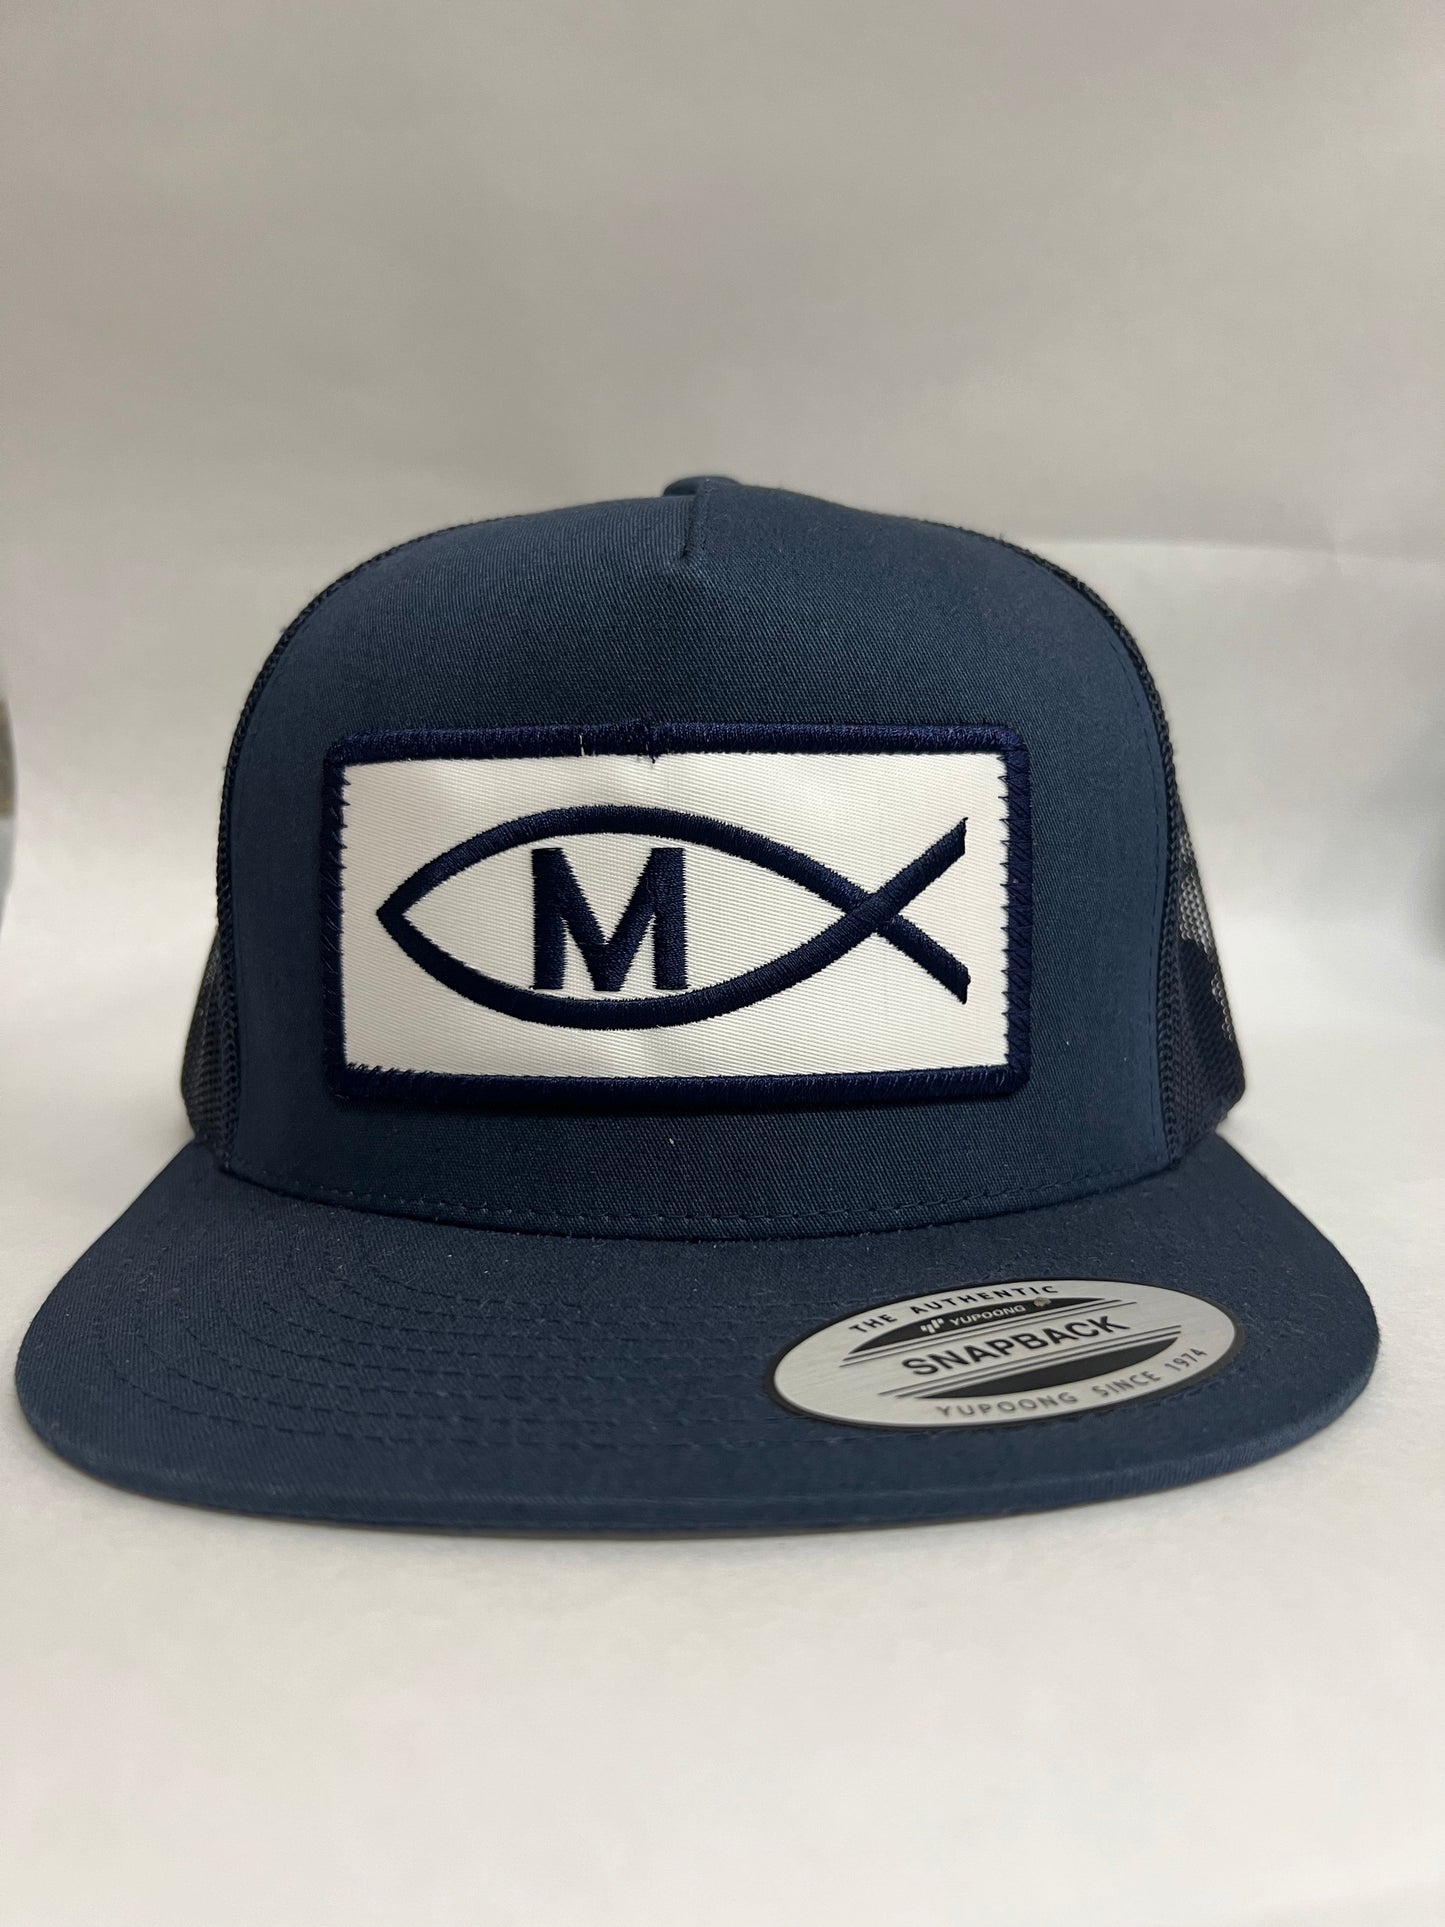 Martinez Patched Navy Hat